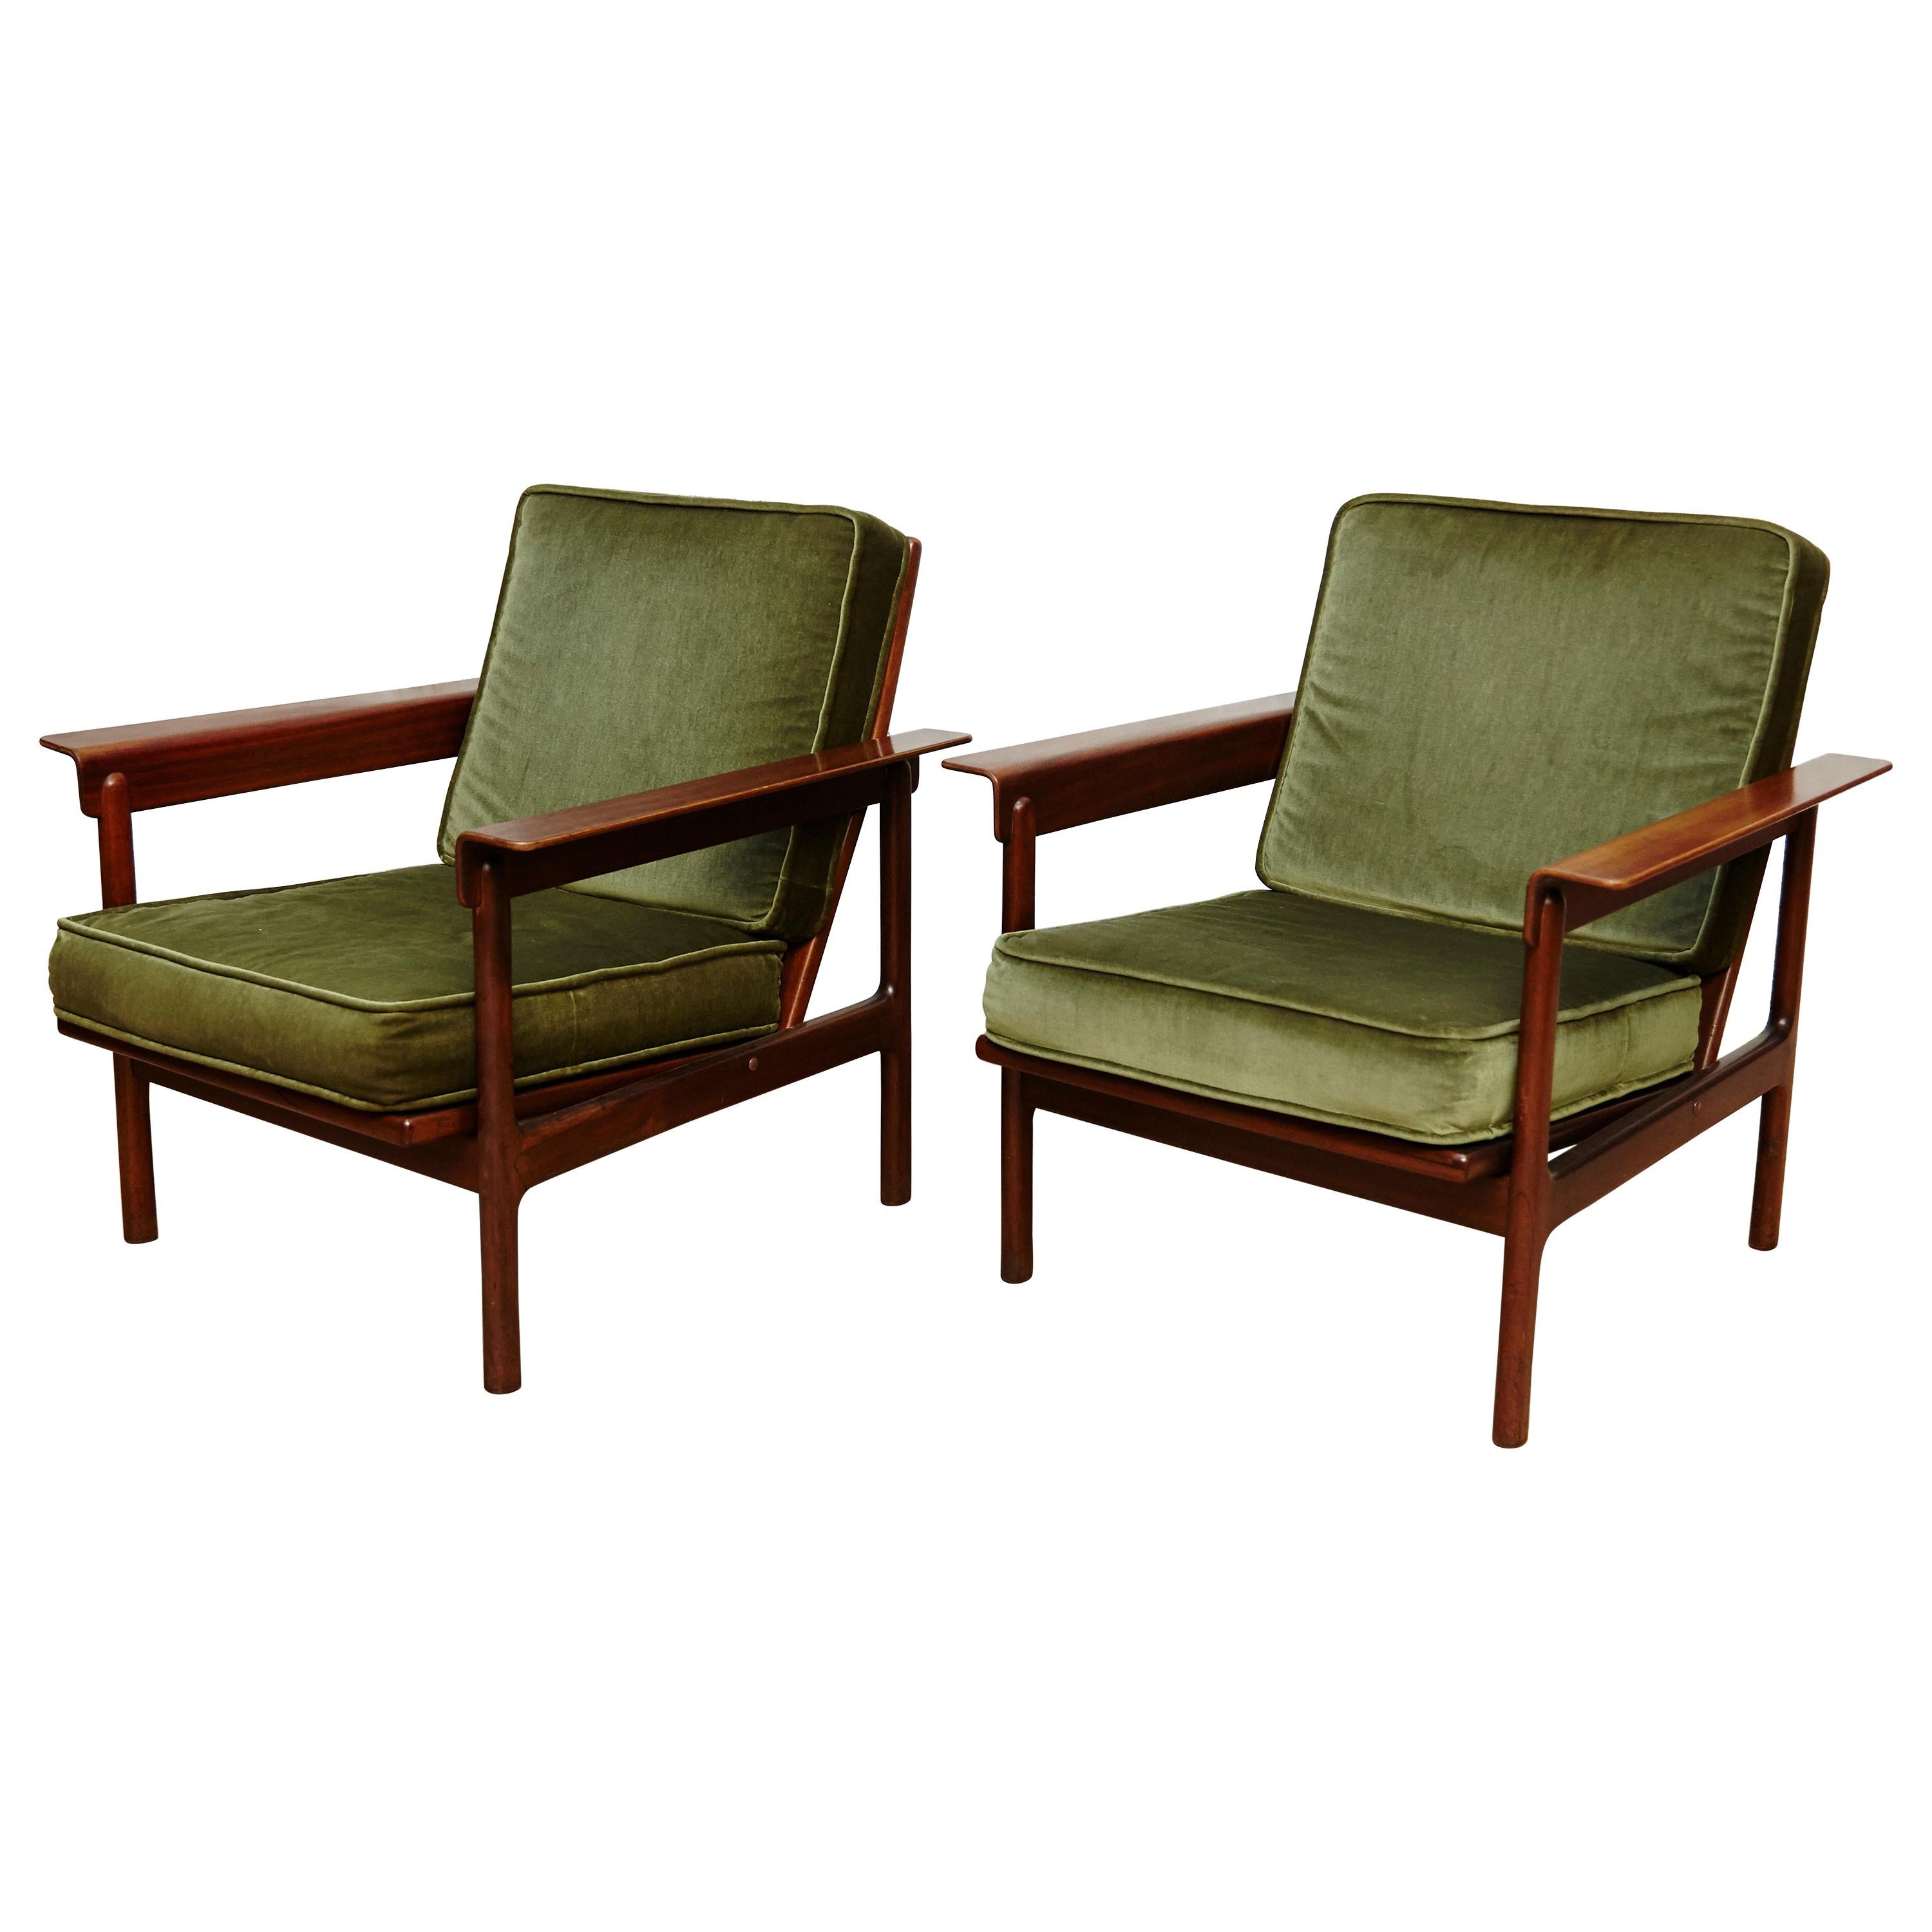 Set of Teak Wood Two Easy Chairs, circa 1960